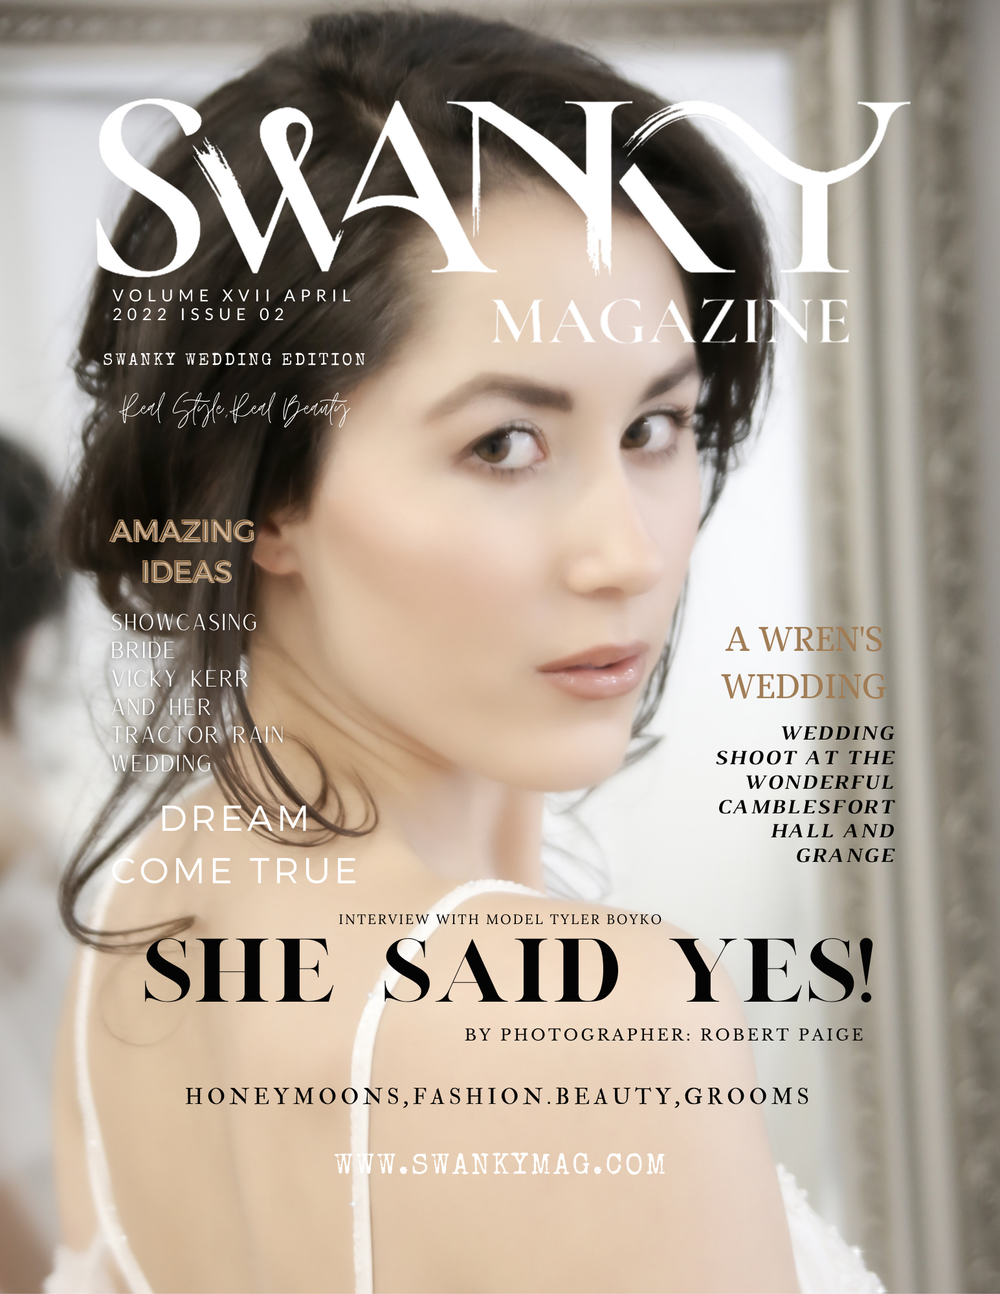 Swanky Wedding Editions April VOL XVII Issue 2 - PRINT ISSUE